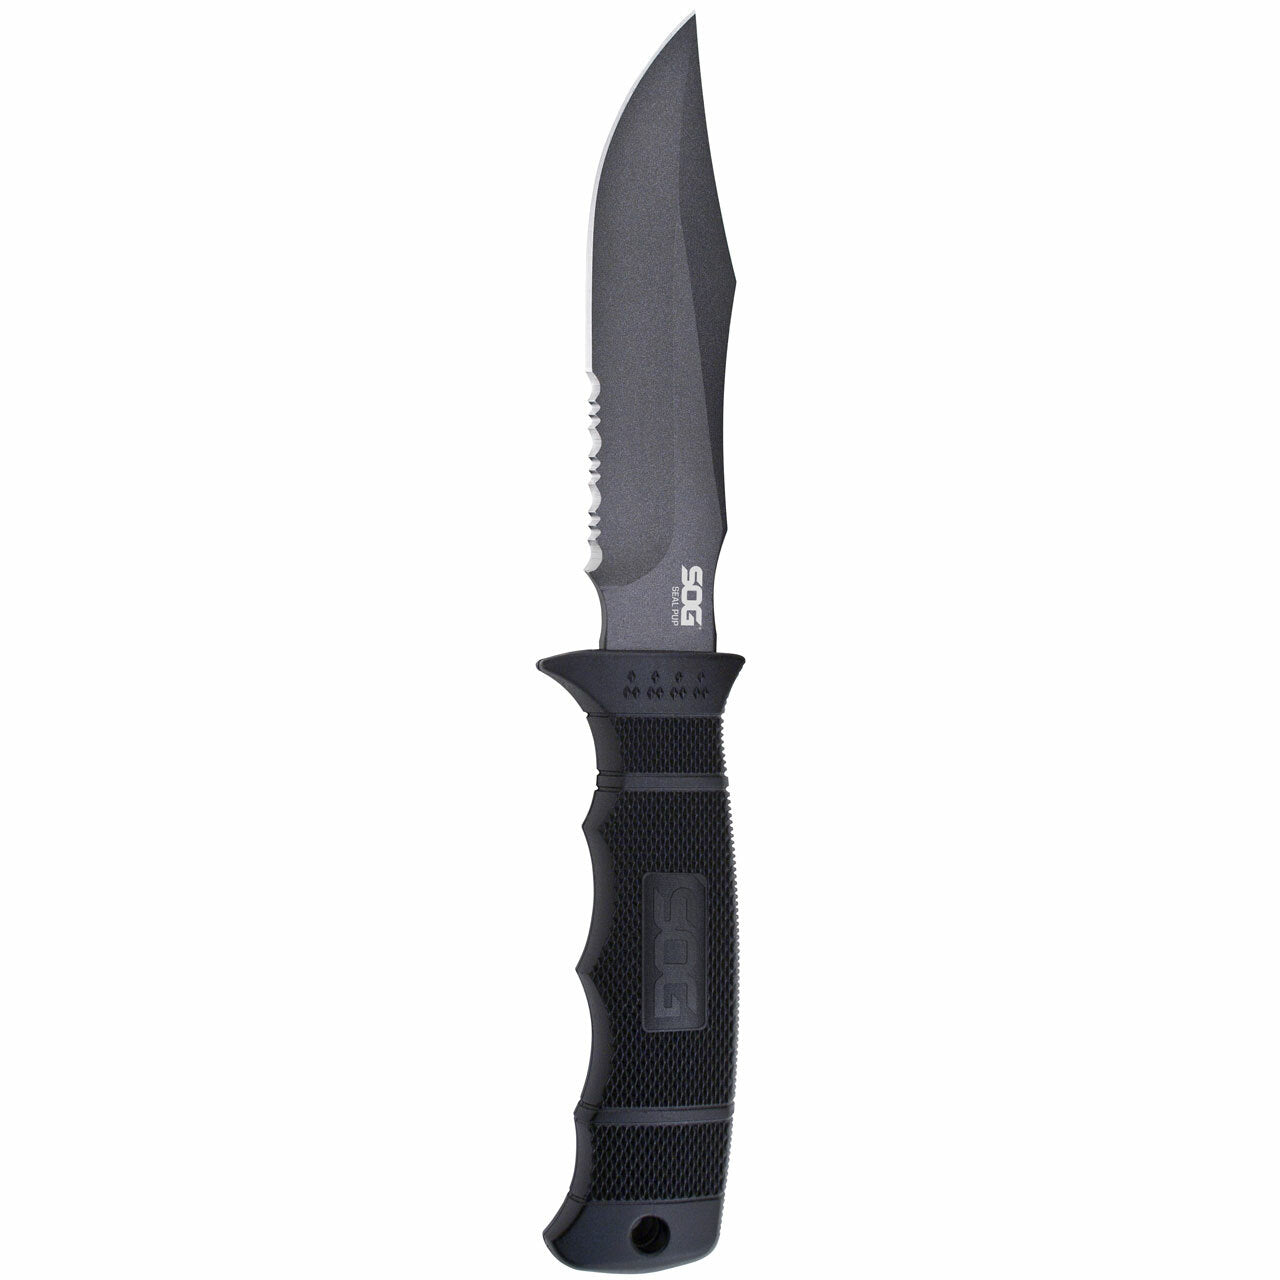 SOG Seal Pup Fixed Blade Knife with Kydex Sheath